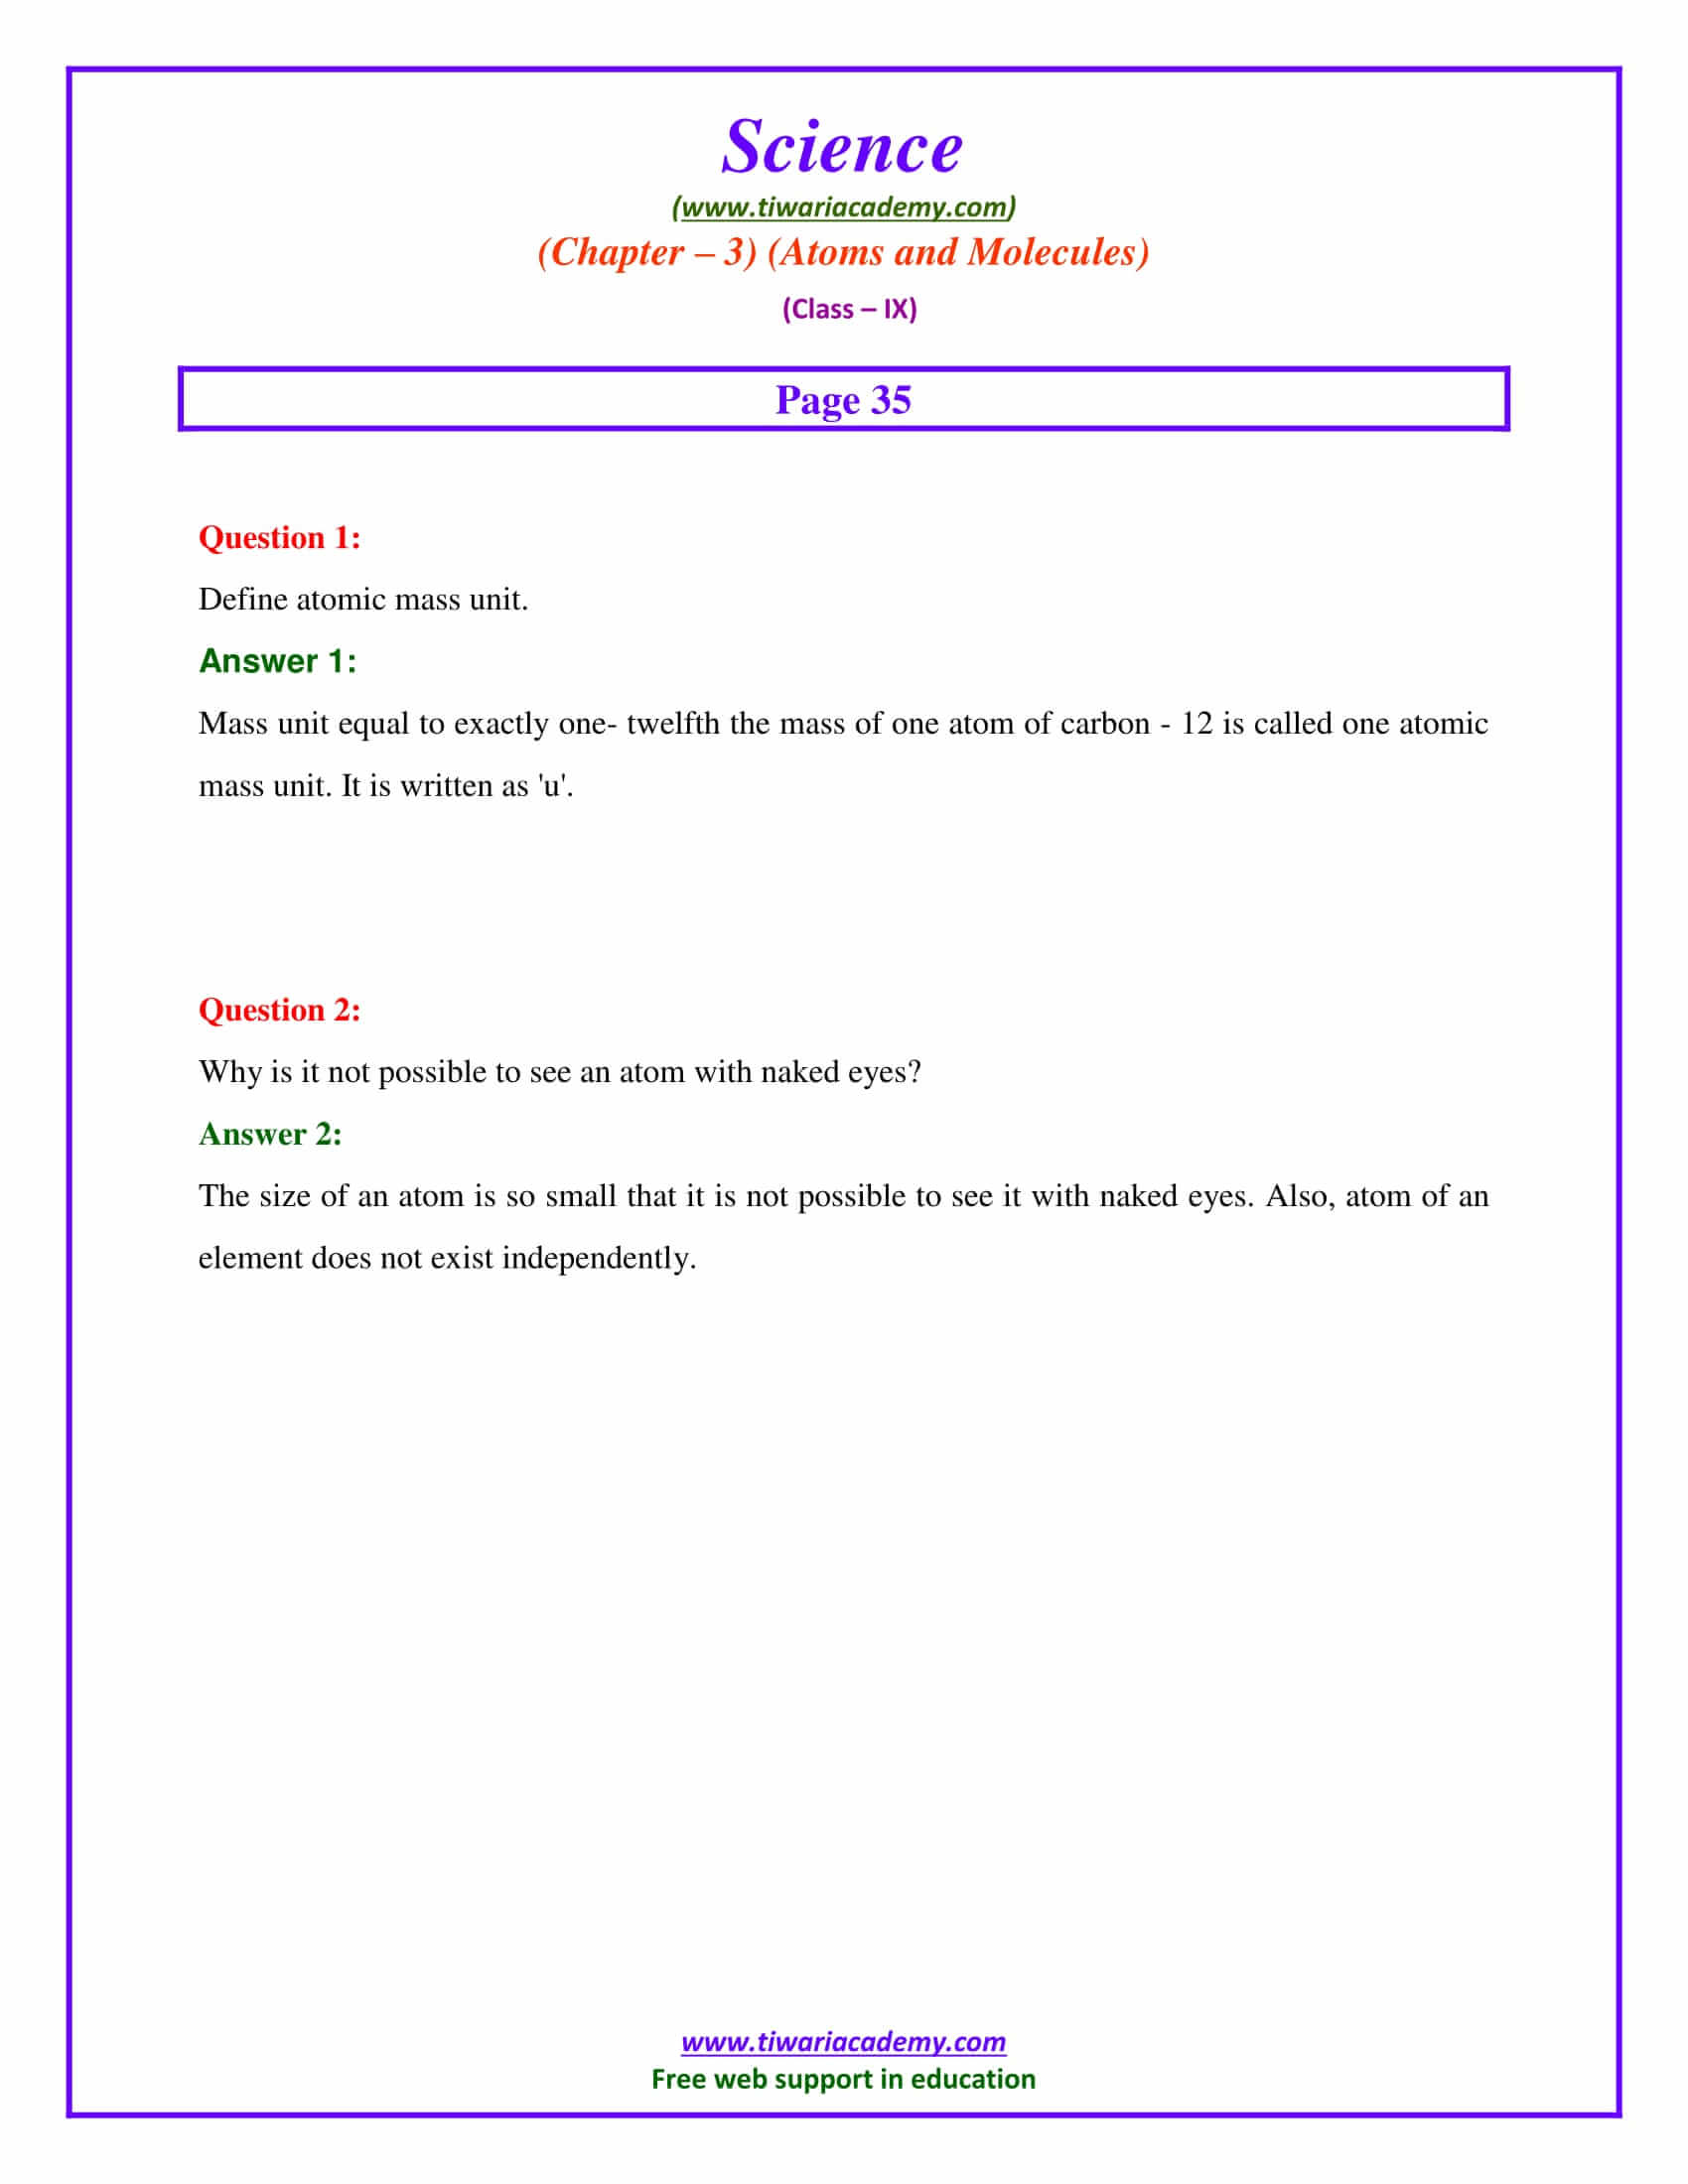 NCERT Solutions for Class 9 Science Chapter 3 Page 35